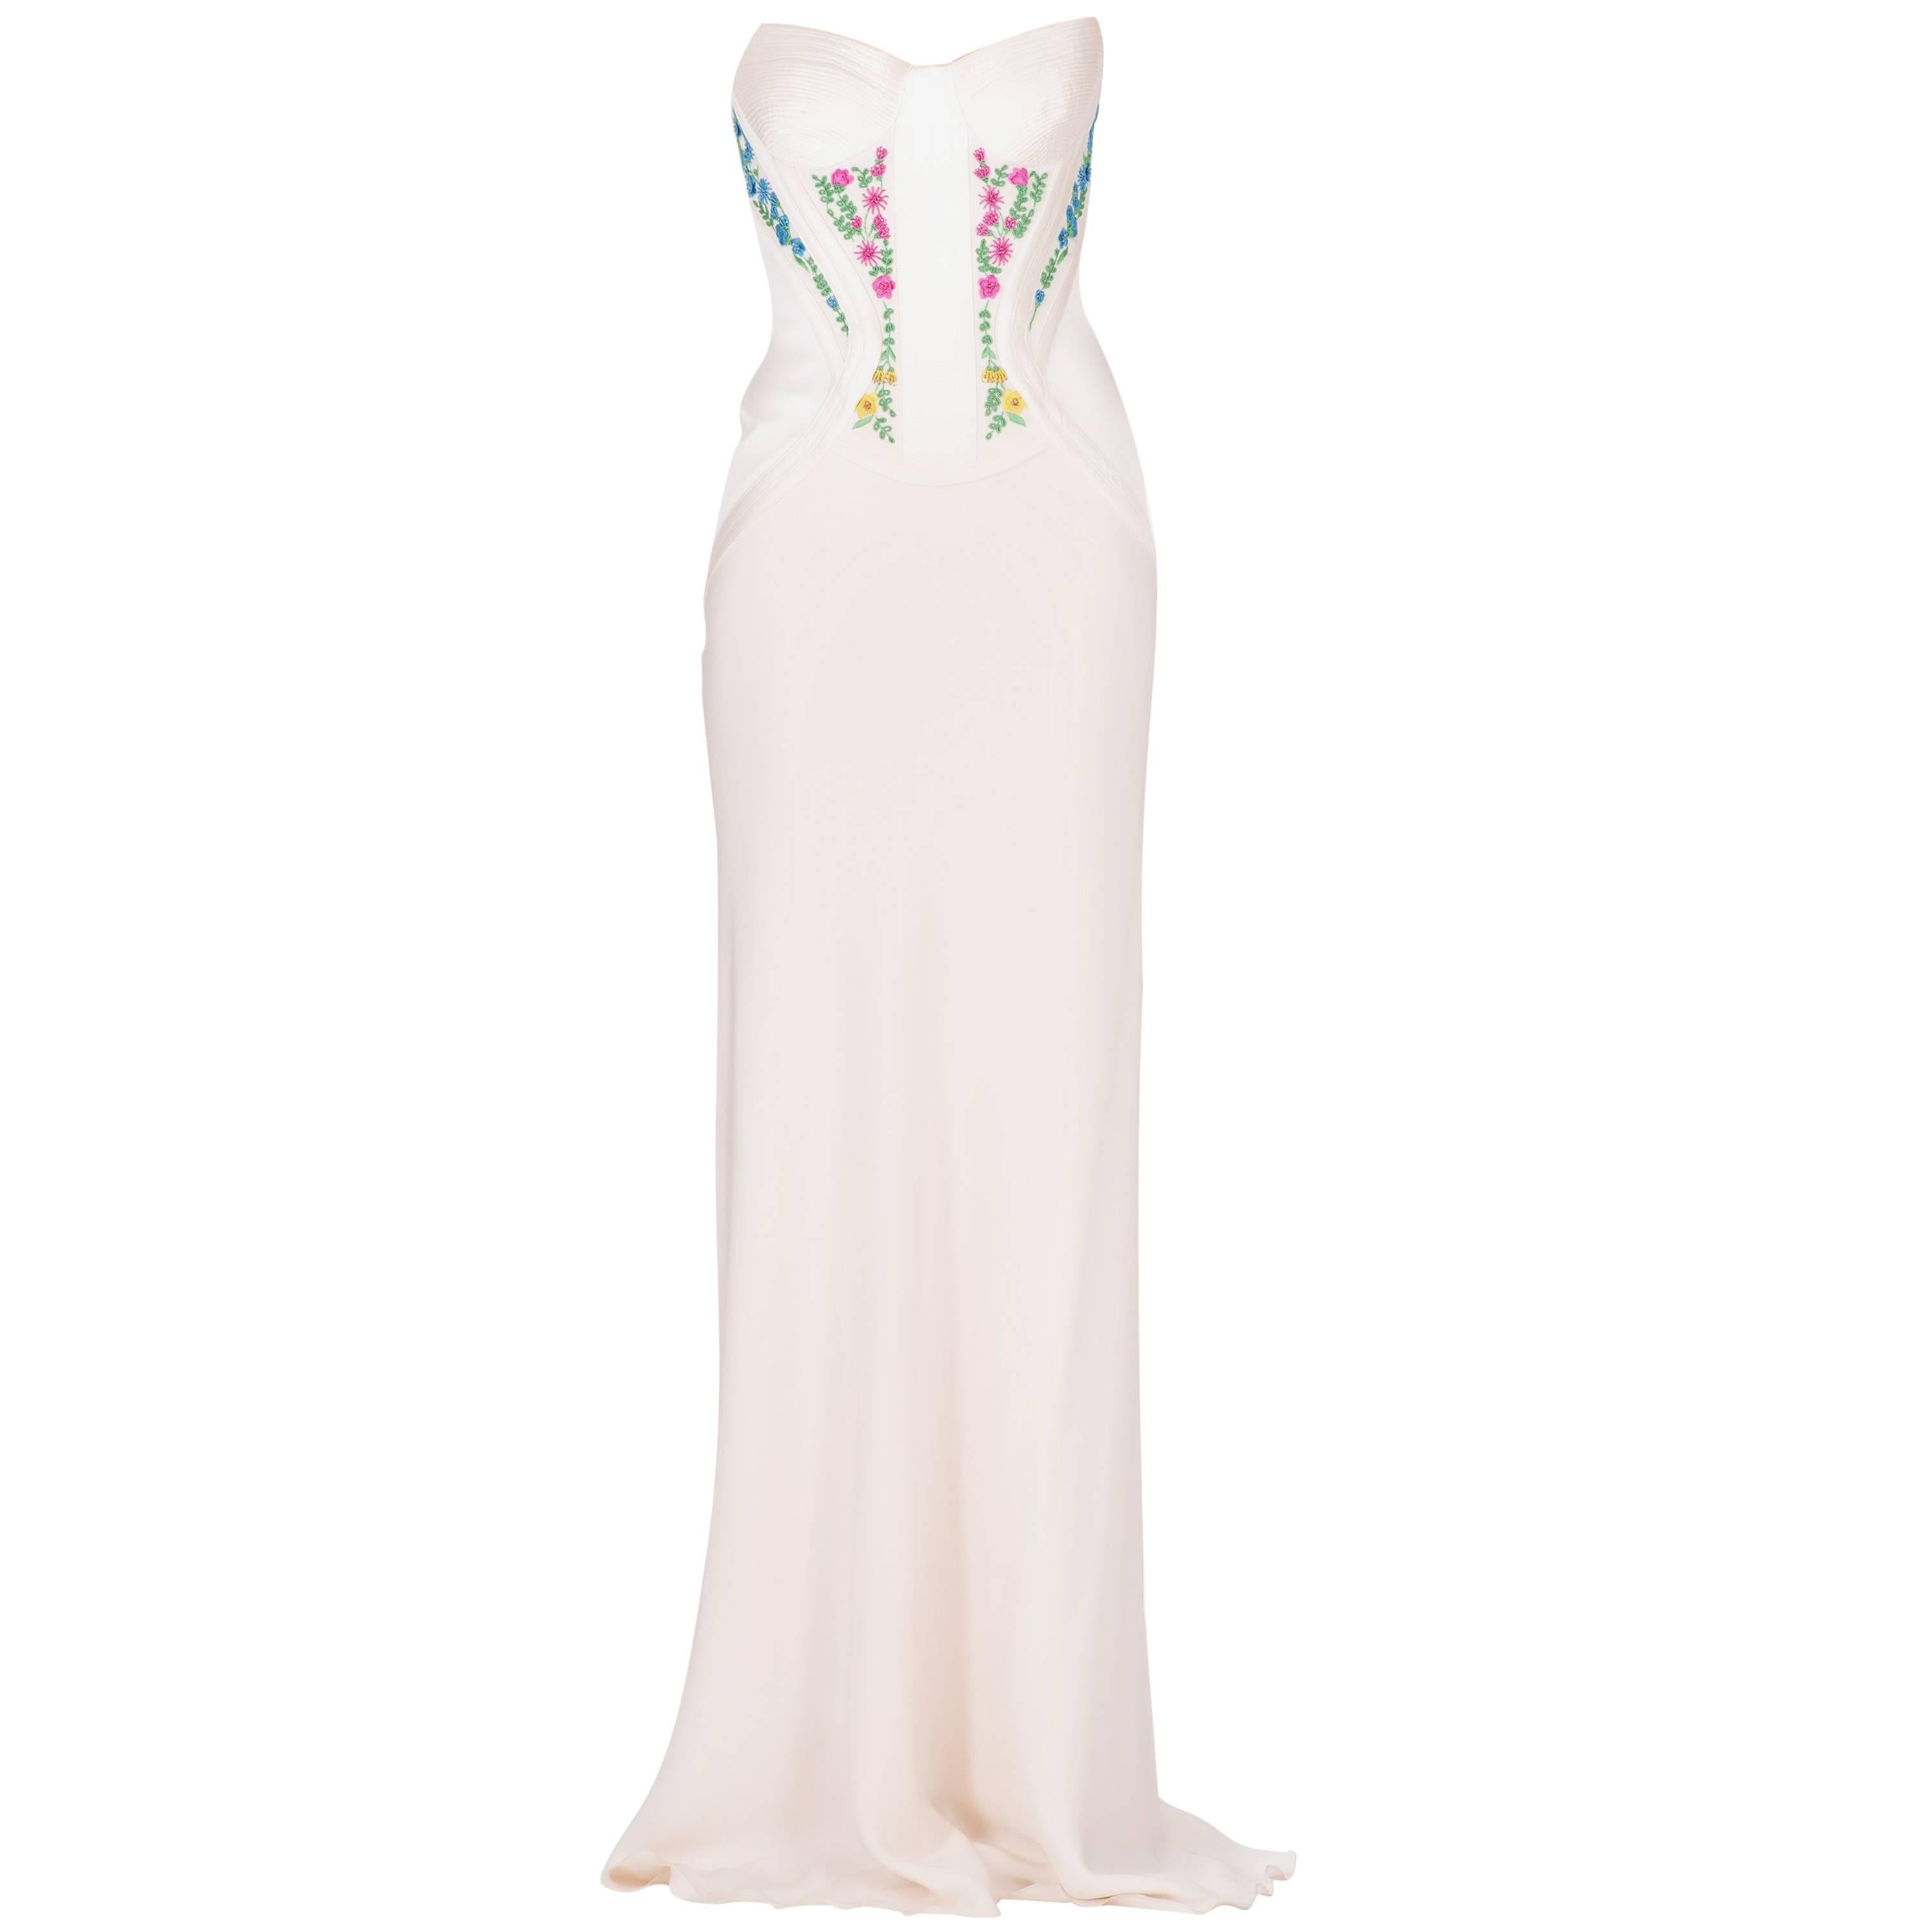 Revived from Gianni Versace archive! EMBROIDERED CORSET SILK LONG DRESS IT 38